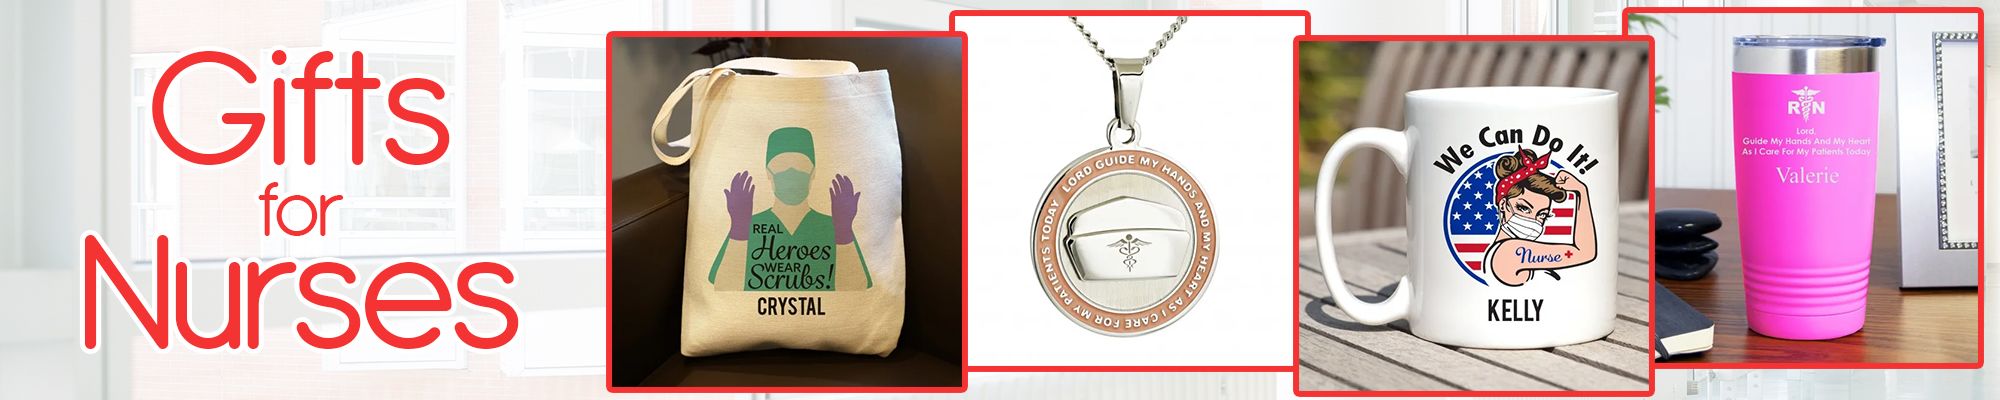 Personalized Gifts for Nurses | Custom Nurse's Week Gifts